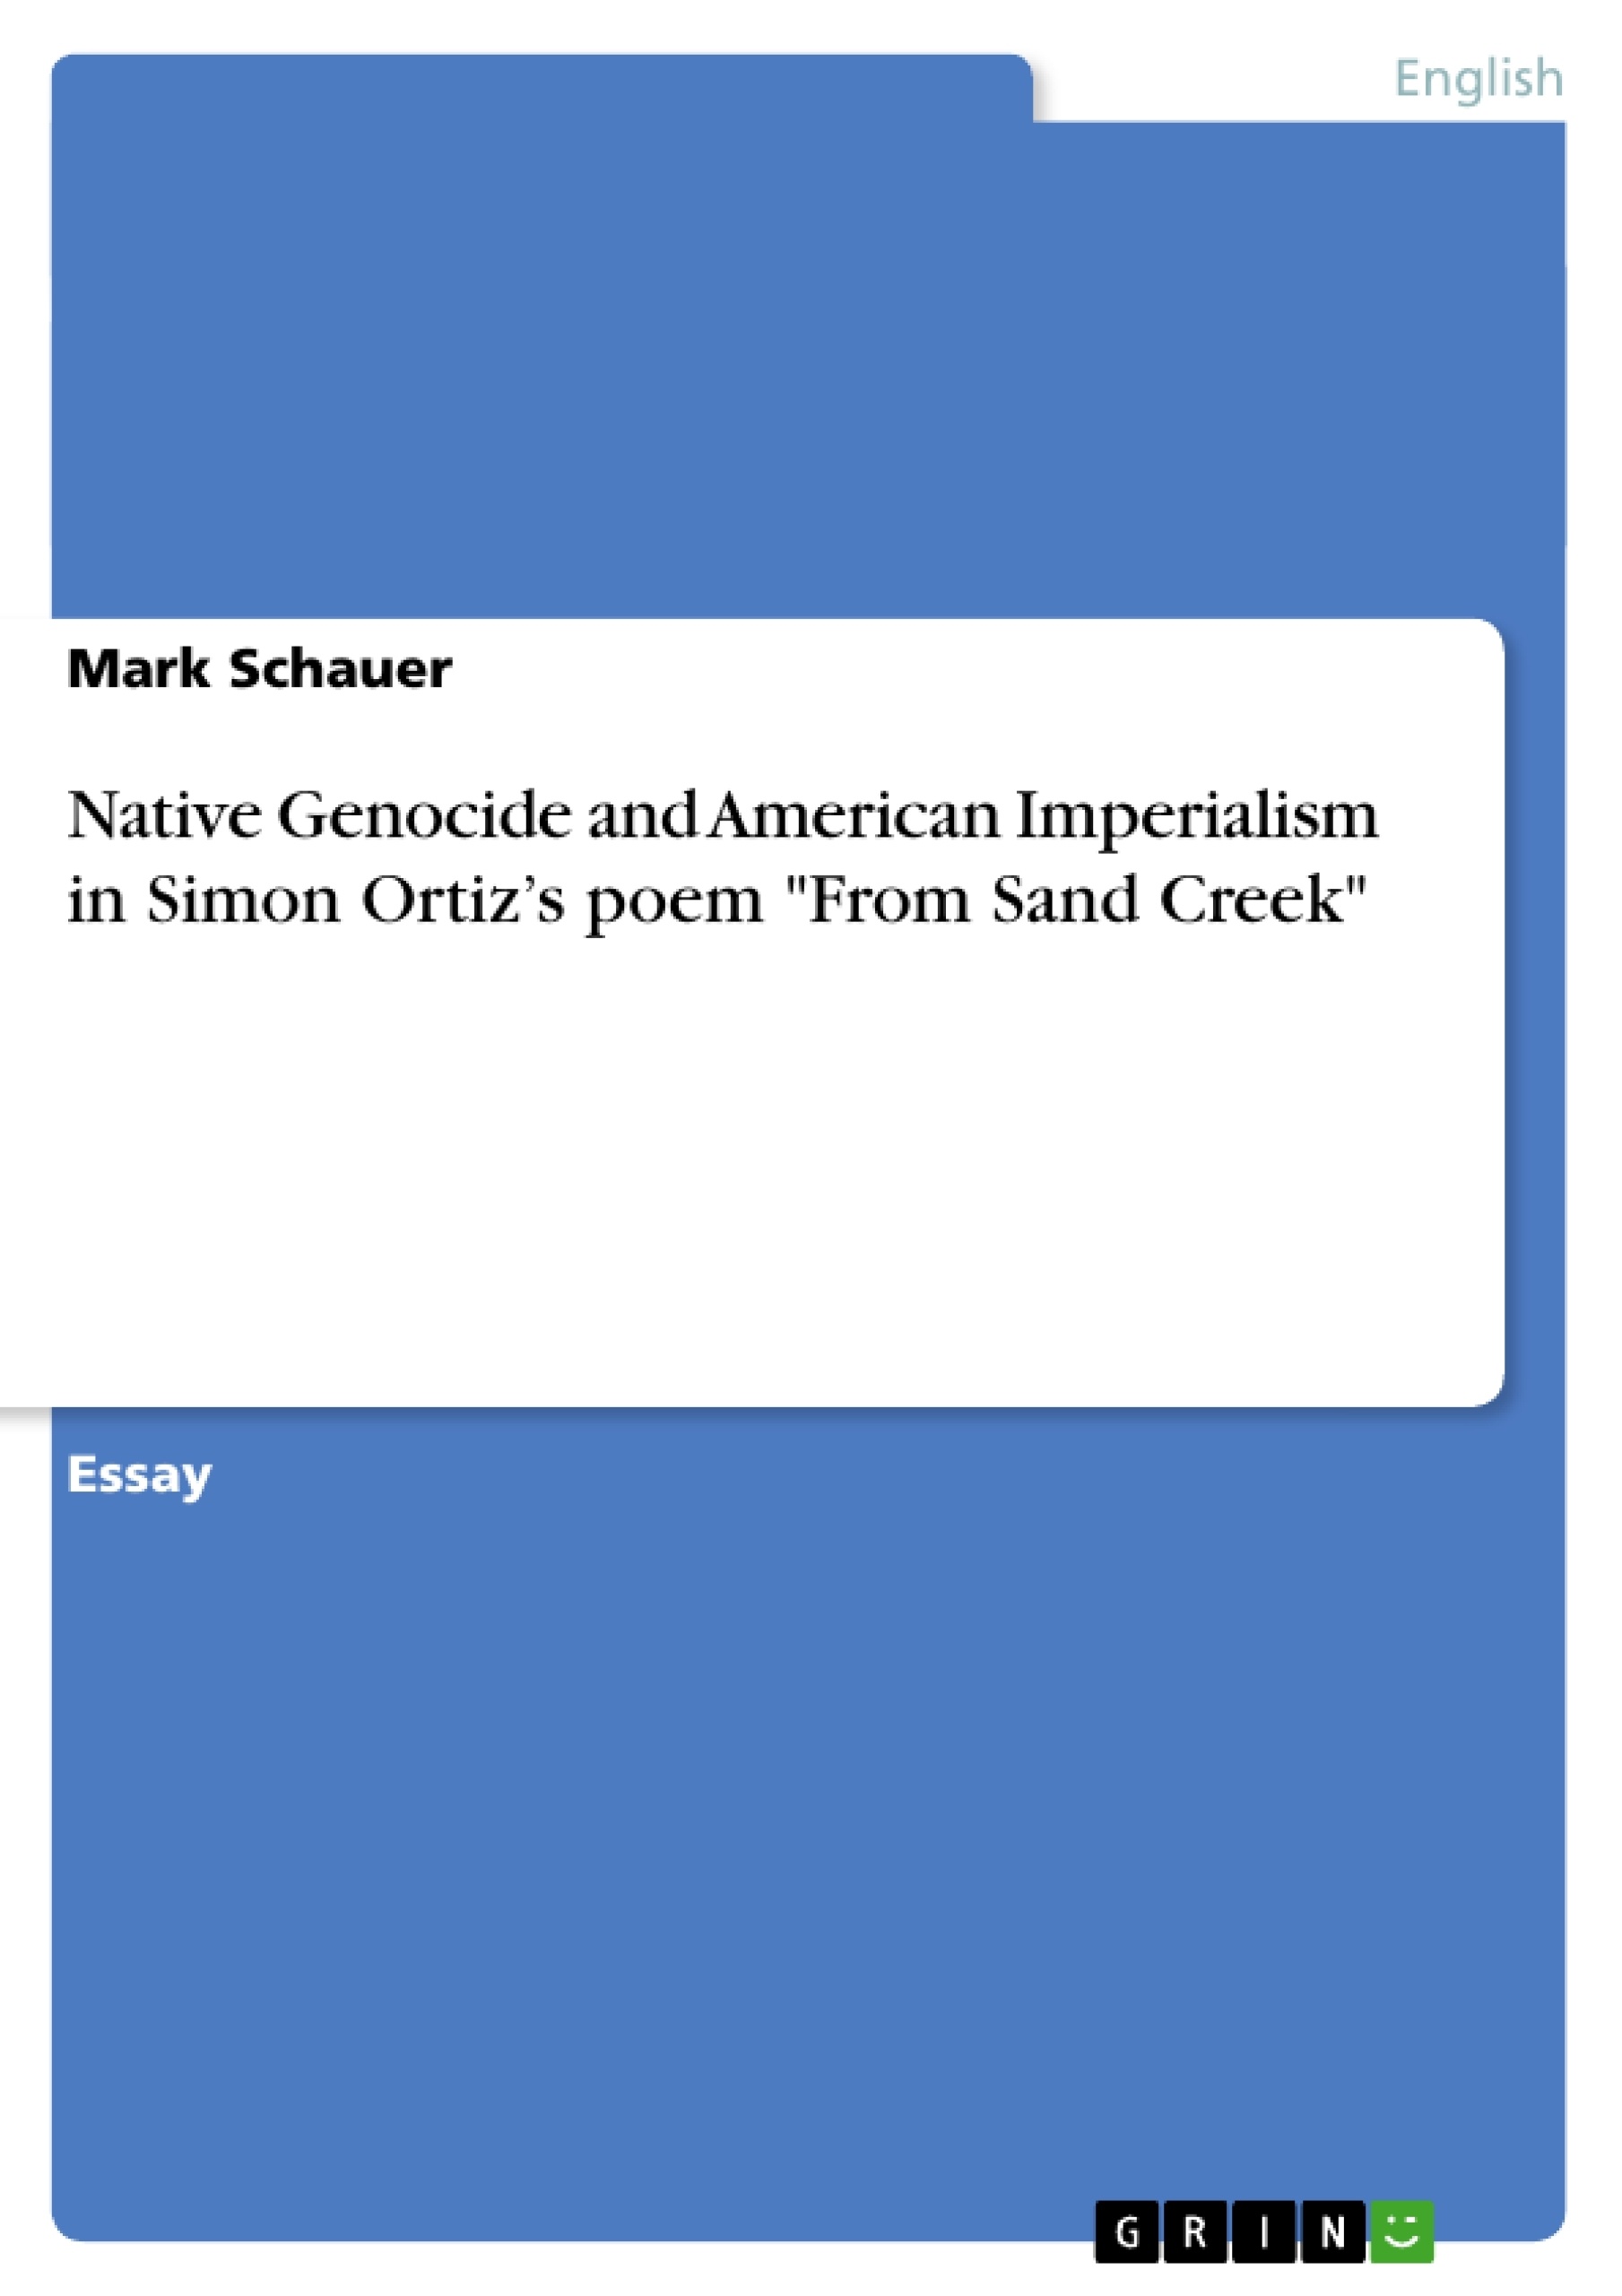 Titre: Native Genocide and American Imperialism in Simon Ortiz’s poem "From Sand Creek"